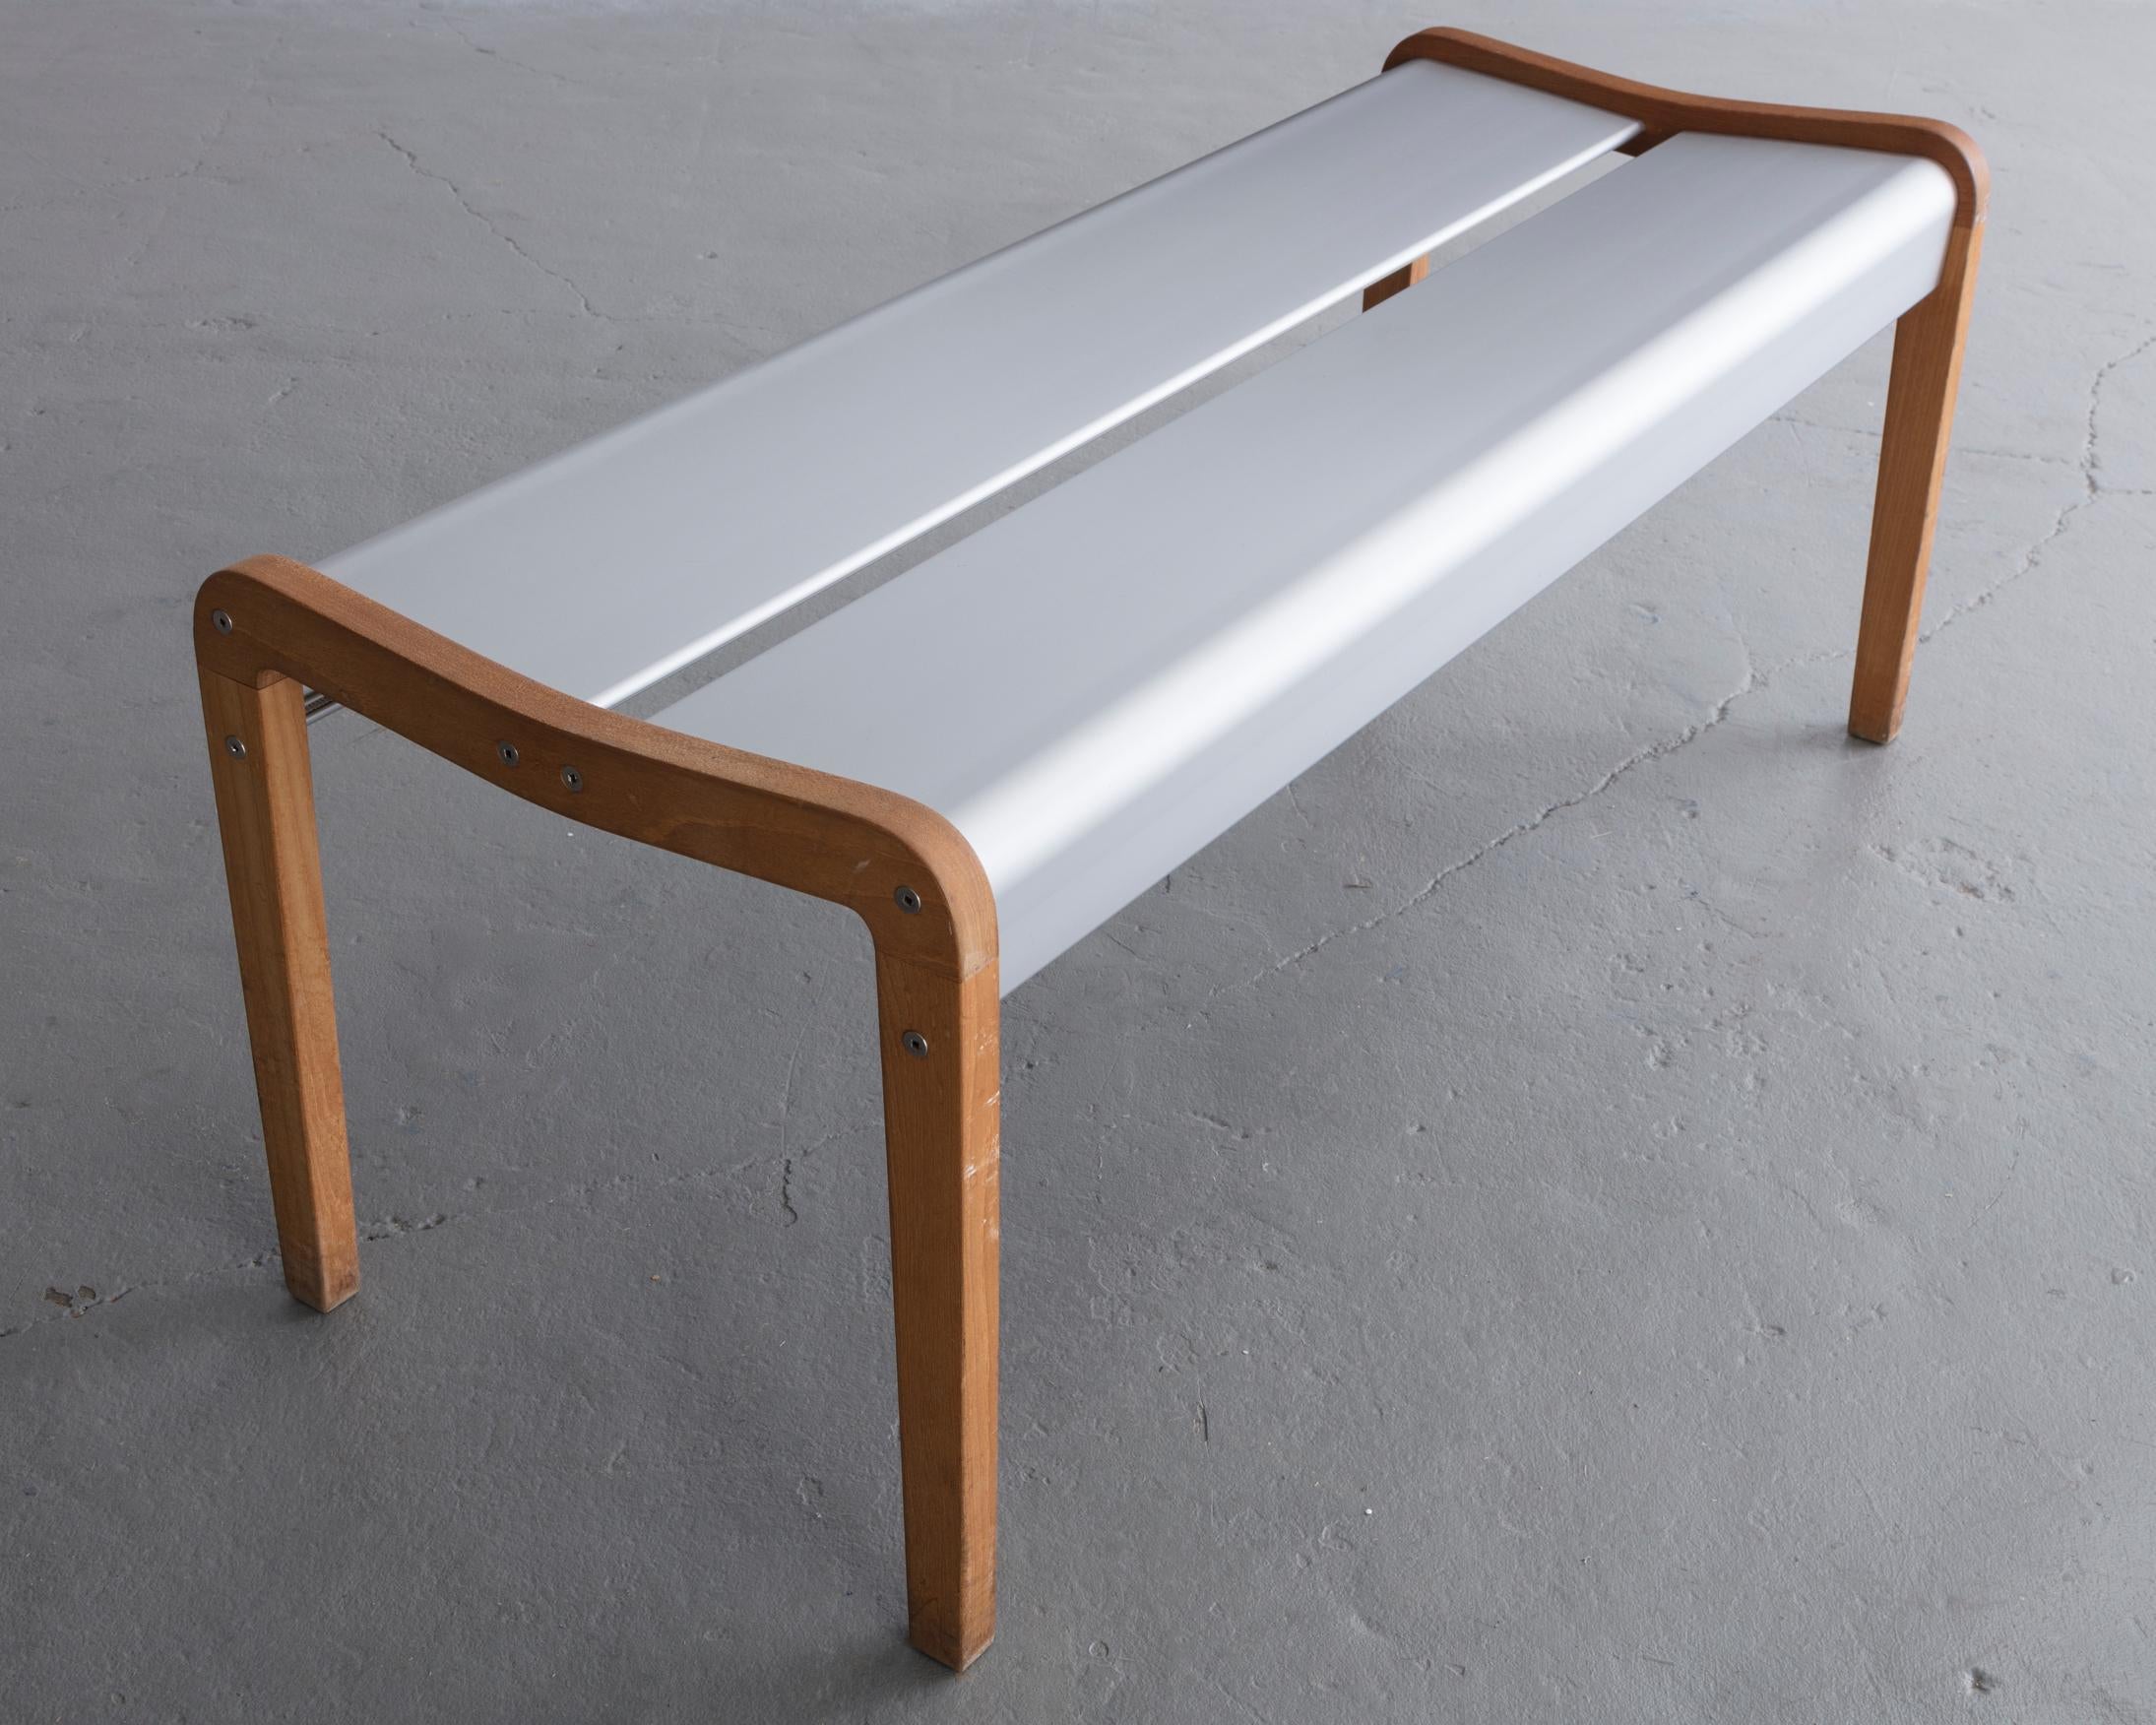 Rasamny bench v. 2 in anodized extruded aluminum and wood. Designed by Ali Tayar, 1999. Produced by ICF New York.